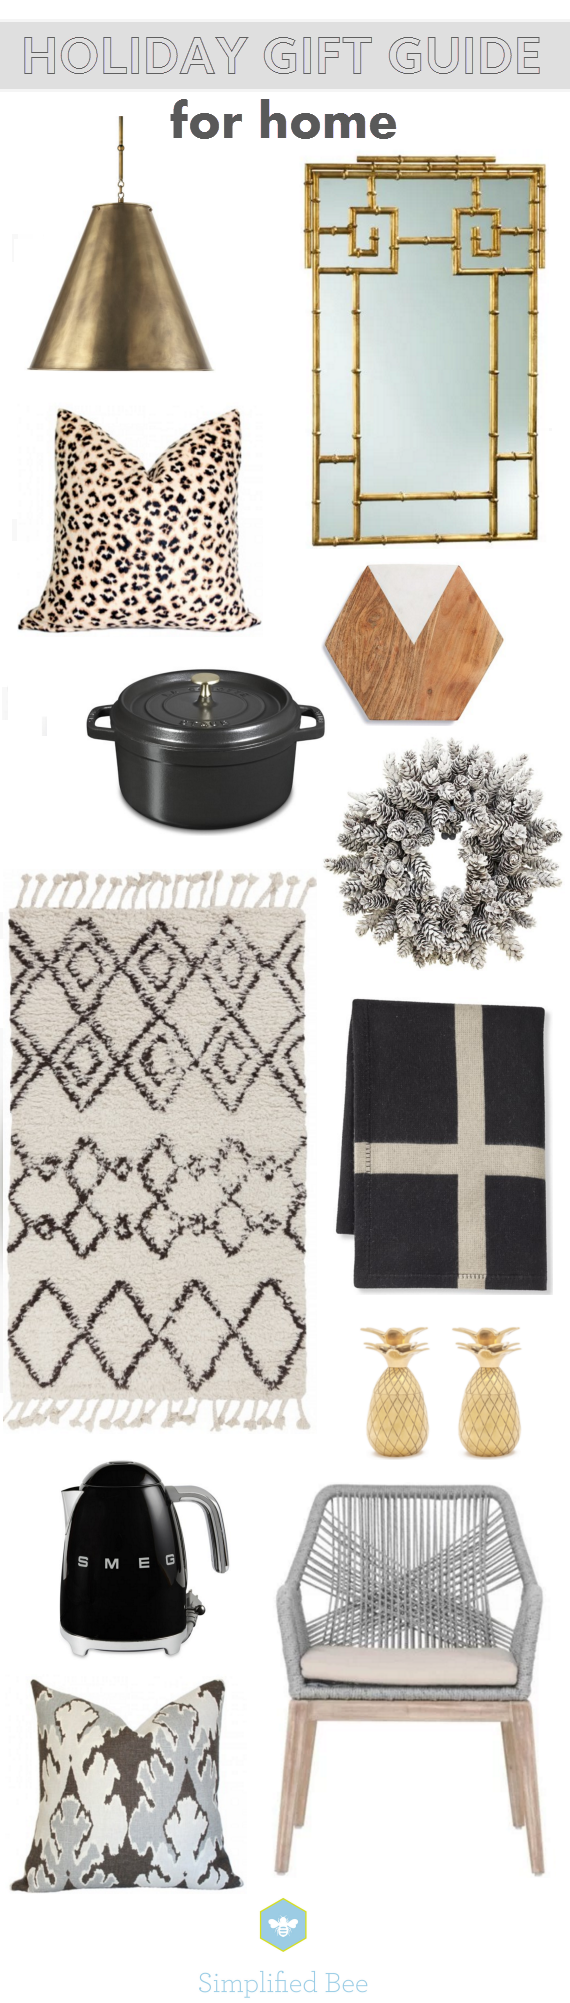 holiday gift guide 2015 // for home // via @simplifiedbee